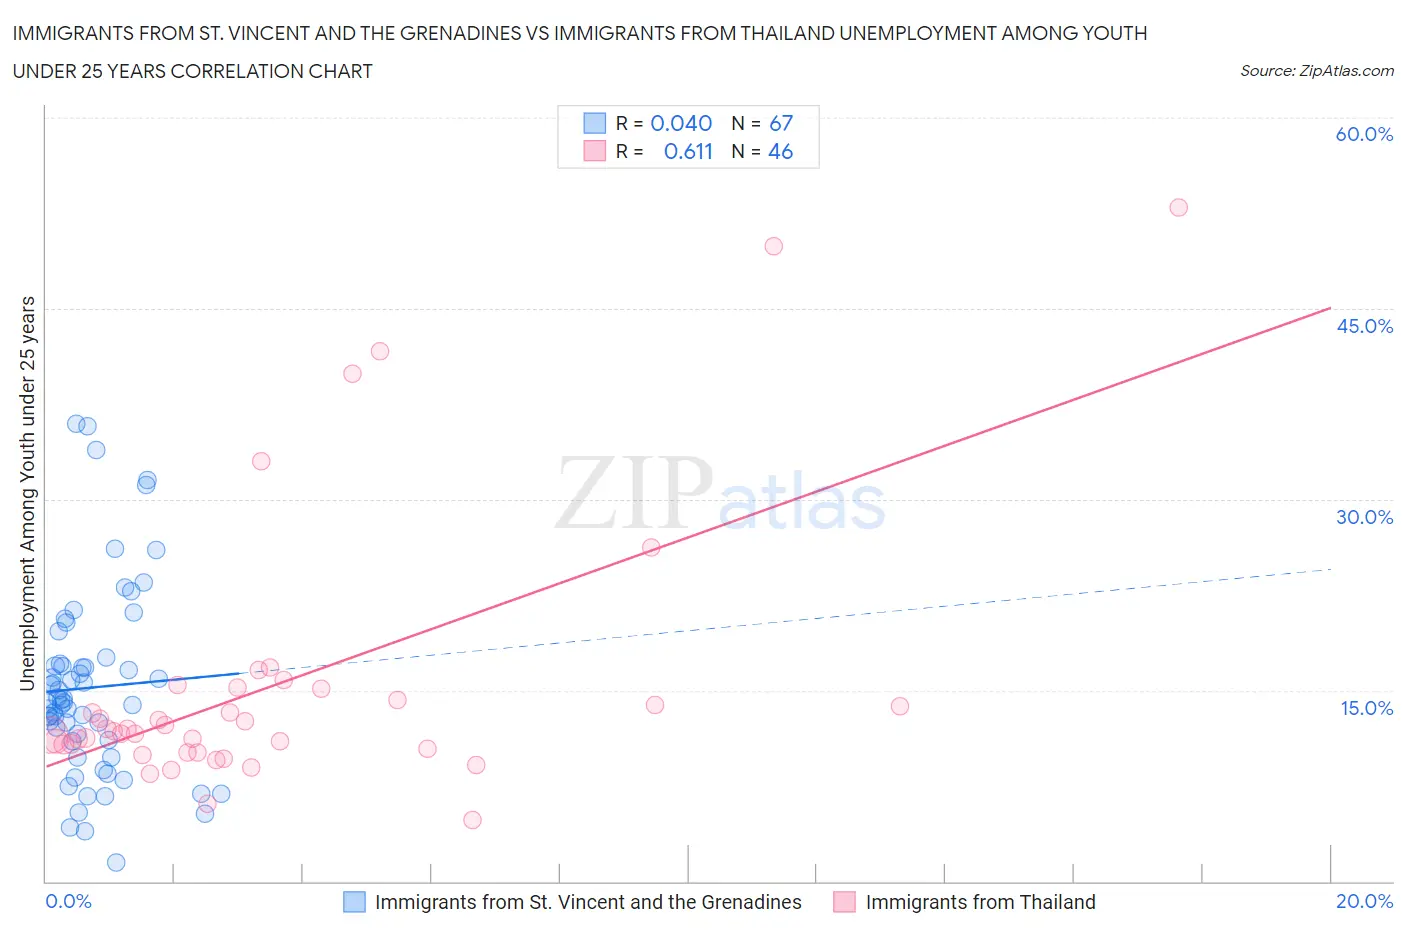 Immigrants from St. Vincent and the Grenadines vs Immigrants from Thailand Unemployment Among Youth under 25 years